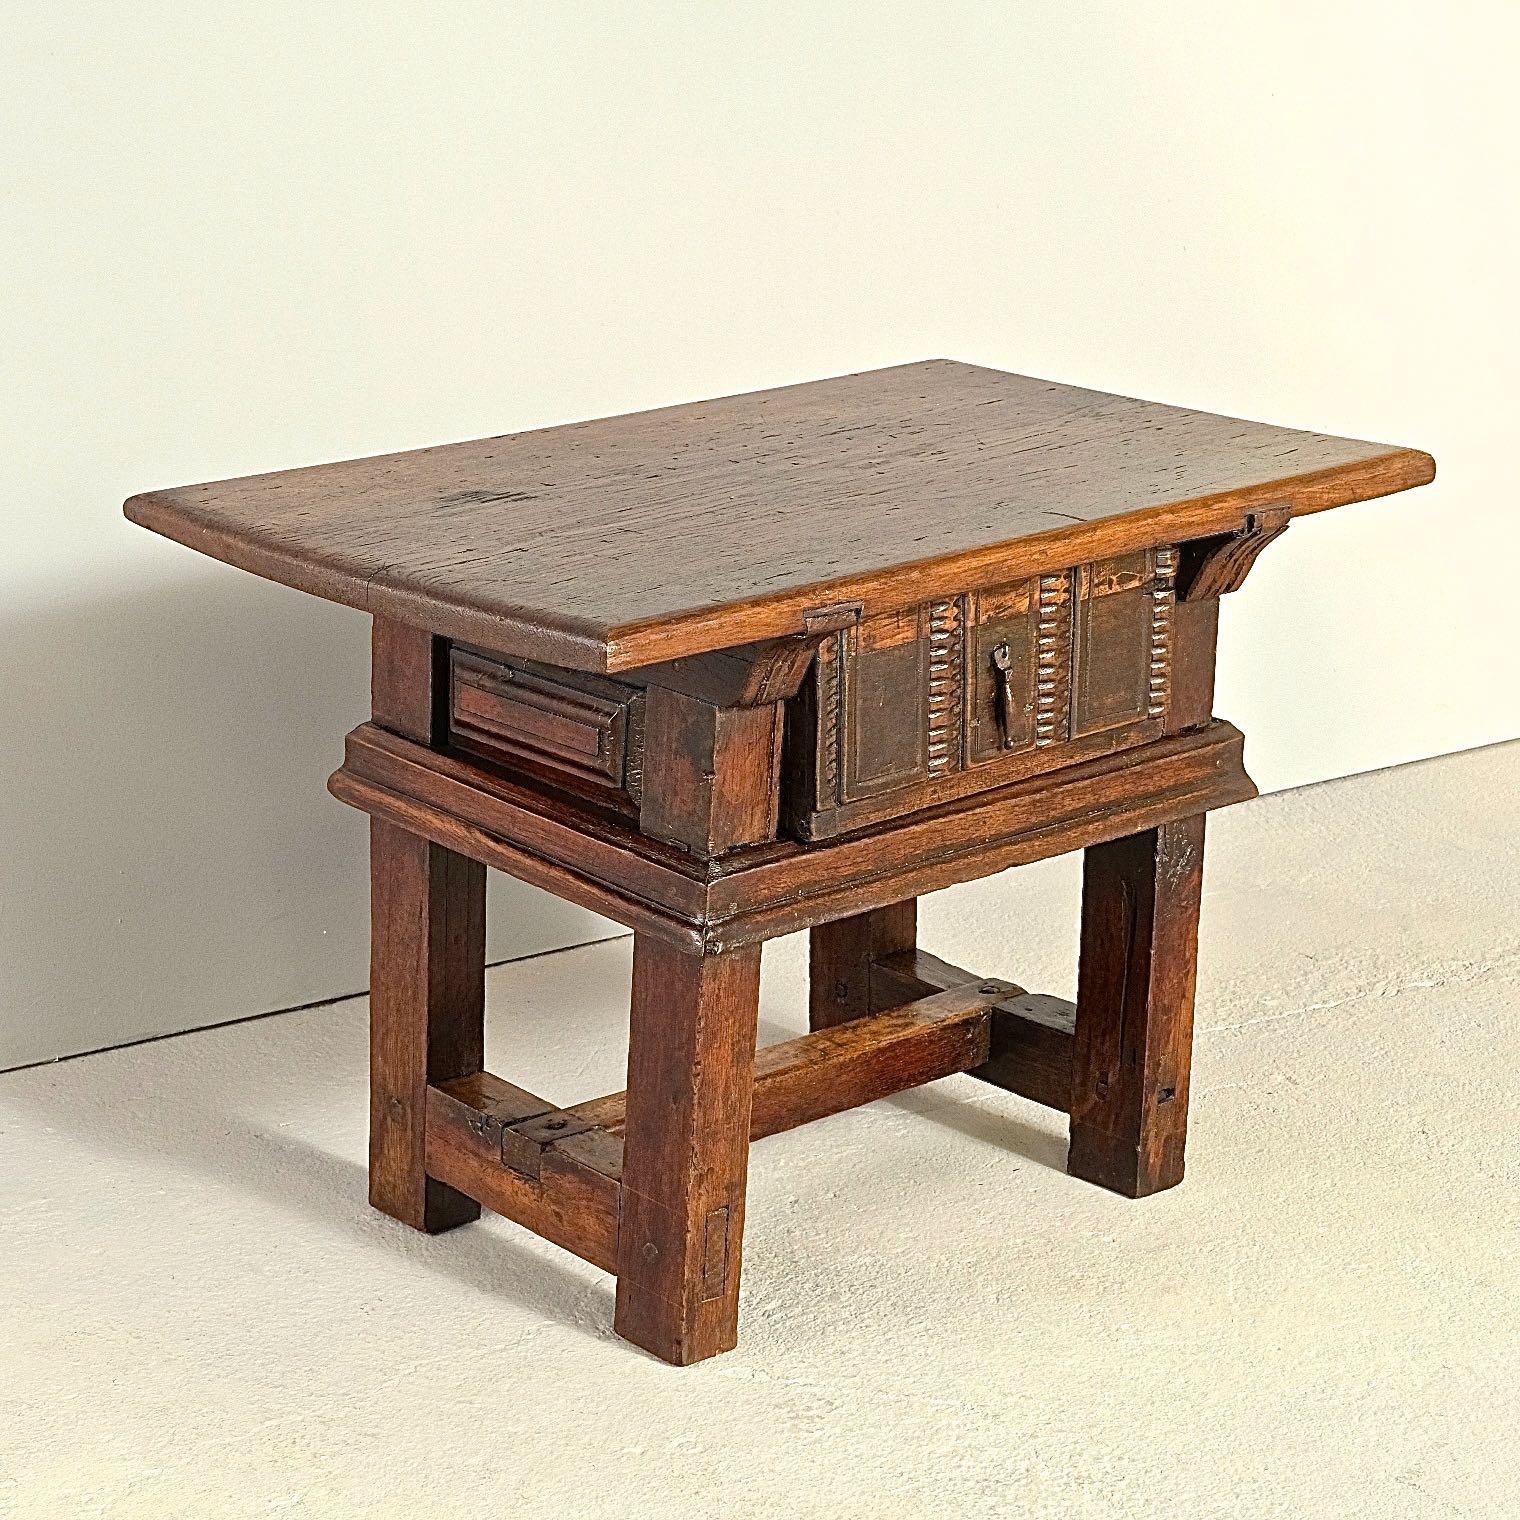 We found this early 18th century oak and chestnut accent table sixty miles from Santiago de Compostela in Spain's far northwestern region of Galicia. 

This is one of those small gems with superb craftsmanship that we are lucky enough to stumble